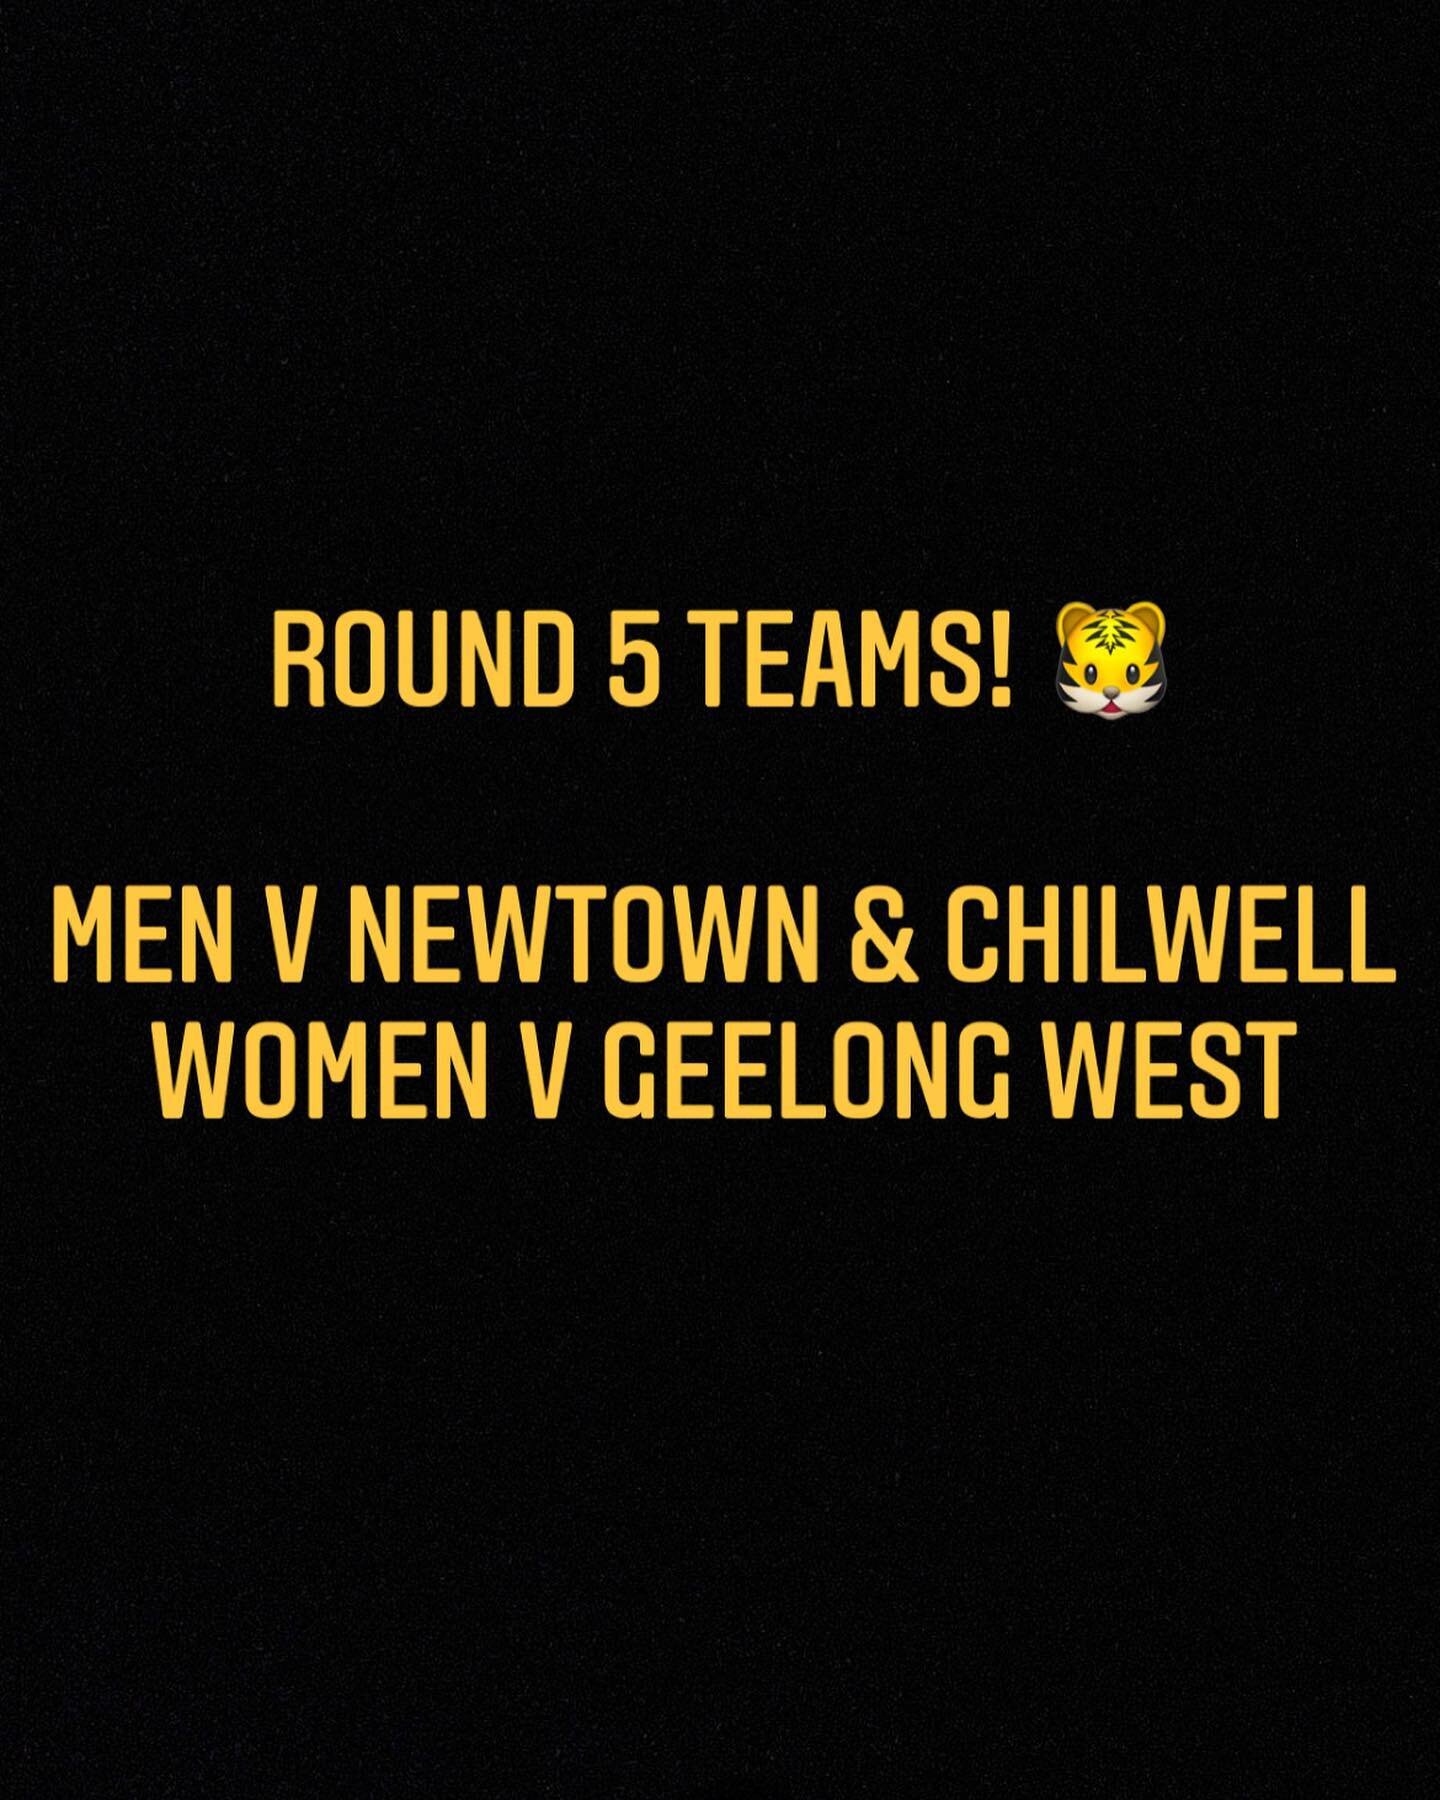 Round 5 Teams
Men take on Newtown with the 1sts/3rds playing at home Saturday afternoon. 2nds/4ths playing at Newtown. 
Women play @ Geelong West on Sunday afternoon.